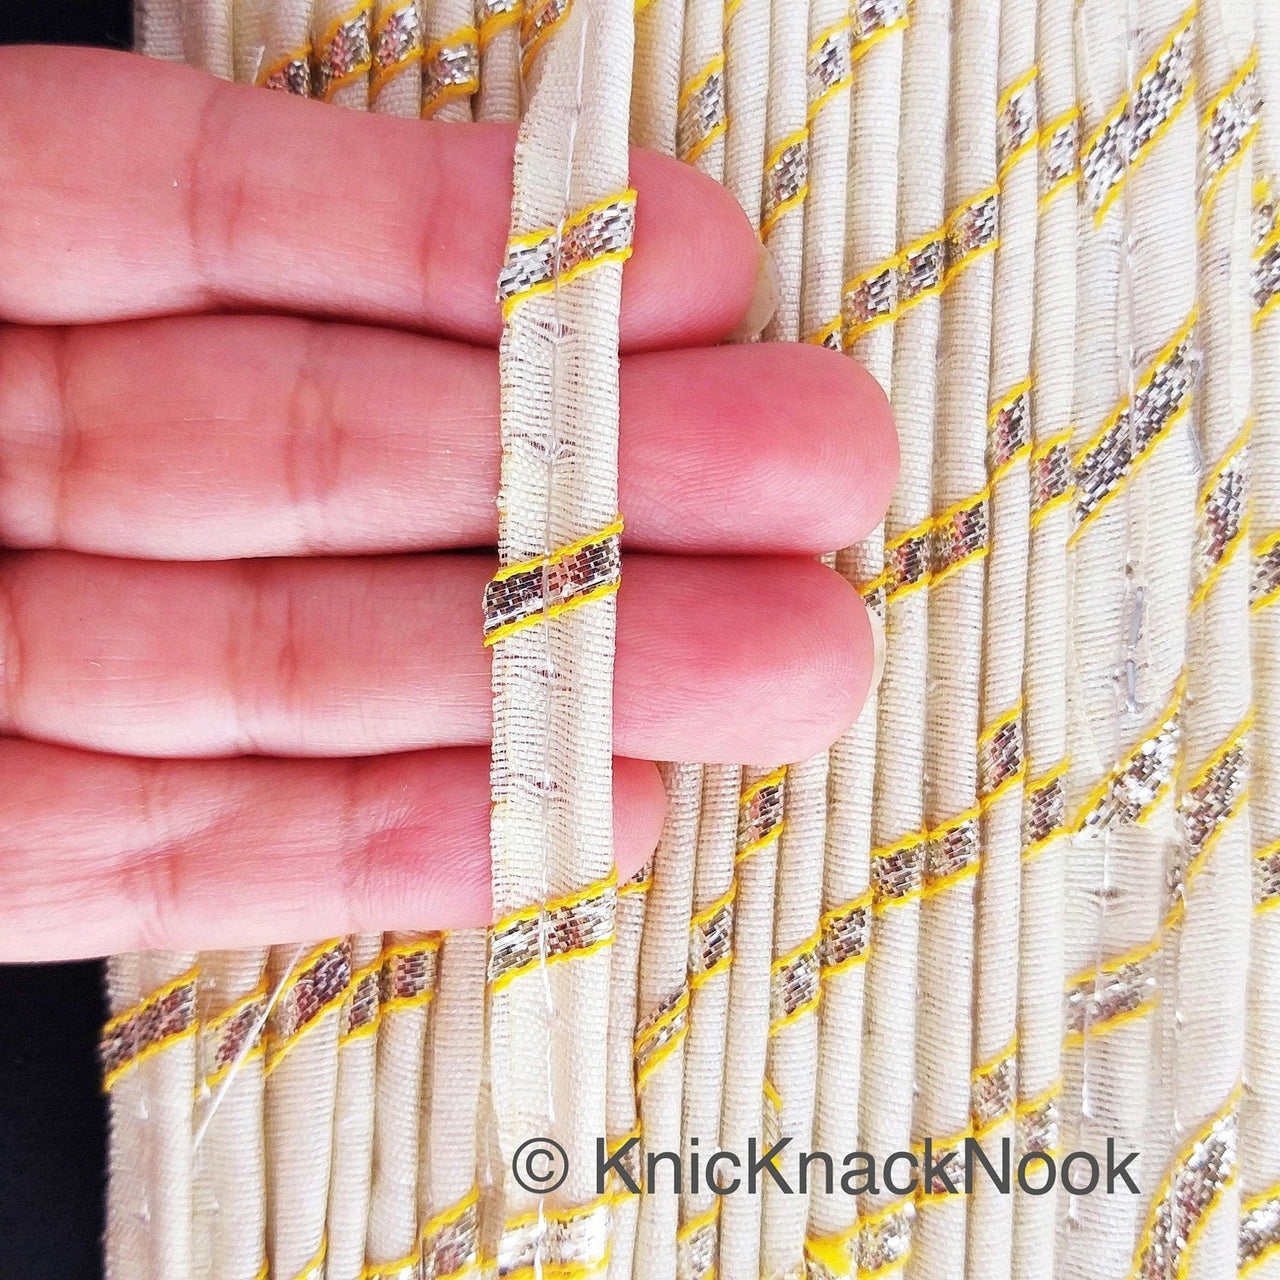 Off White And Gold Stripes Piping Cord Trim, Approx. 8 mm wide, One Yard Trim